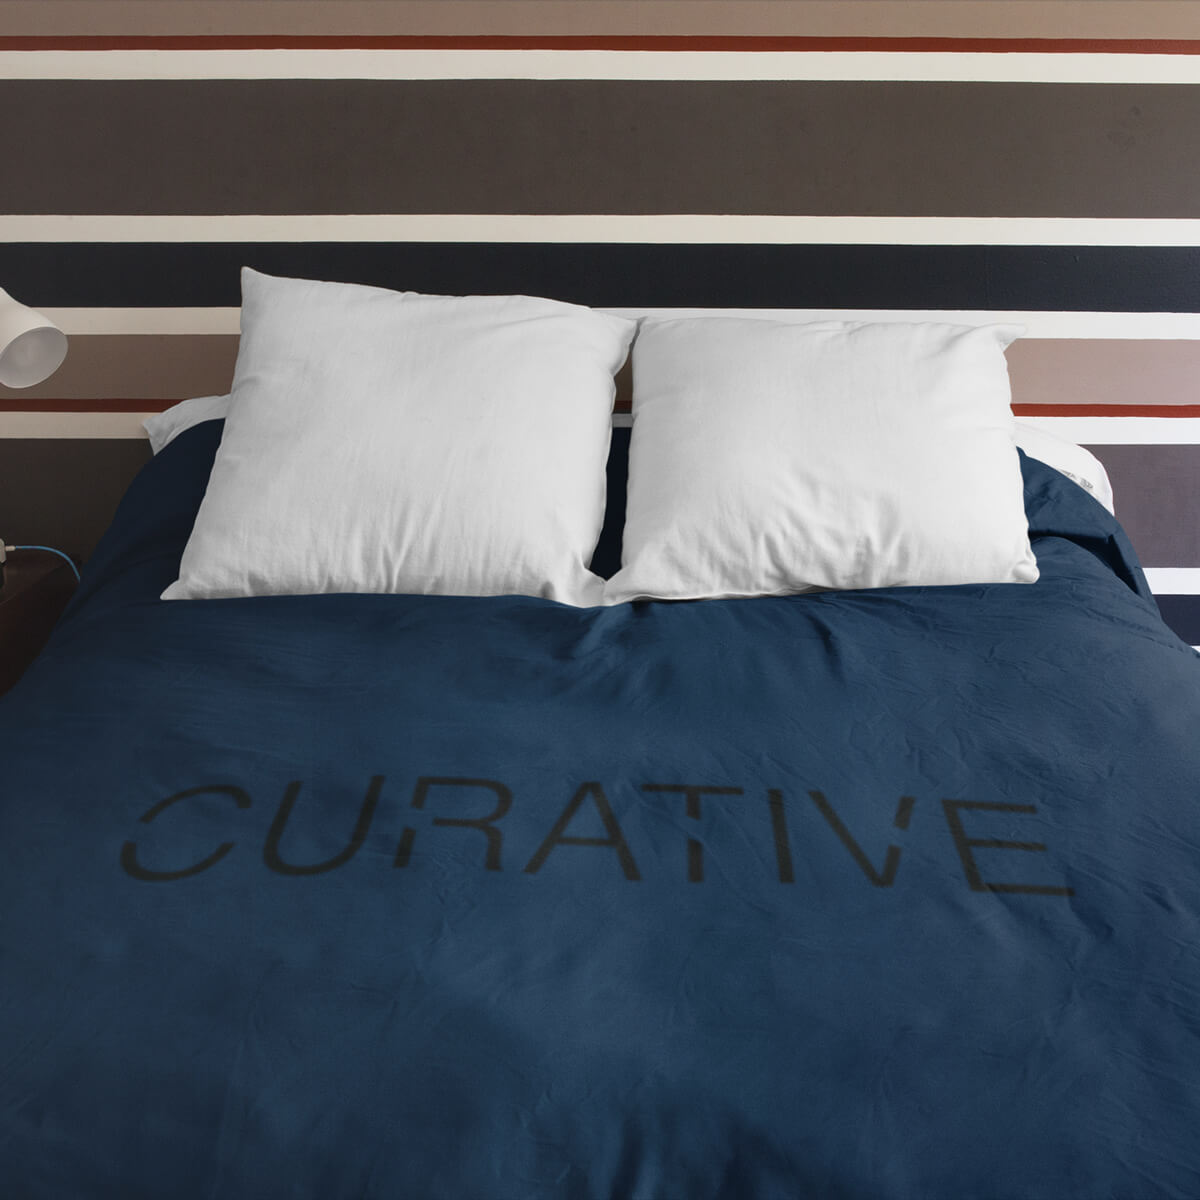 Bed covered by navy with black imprint custom promotional fleece blankets by curative printing